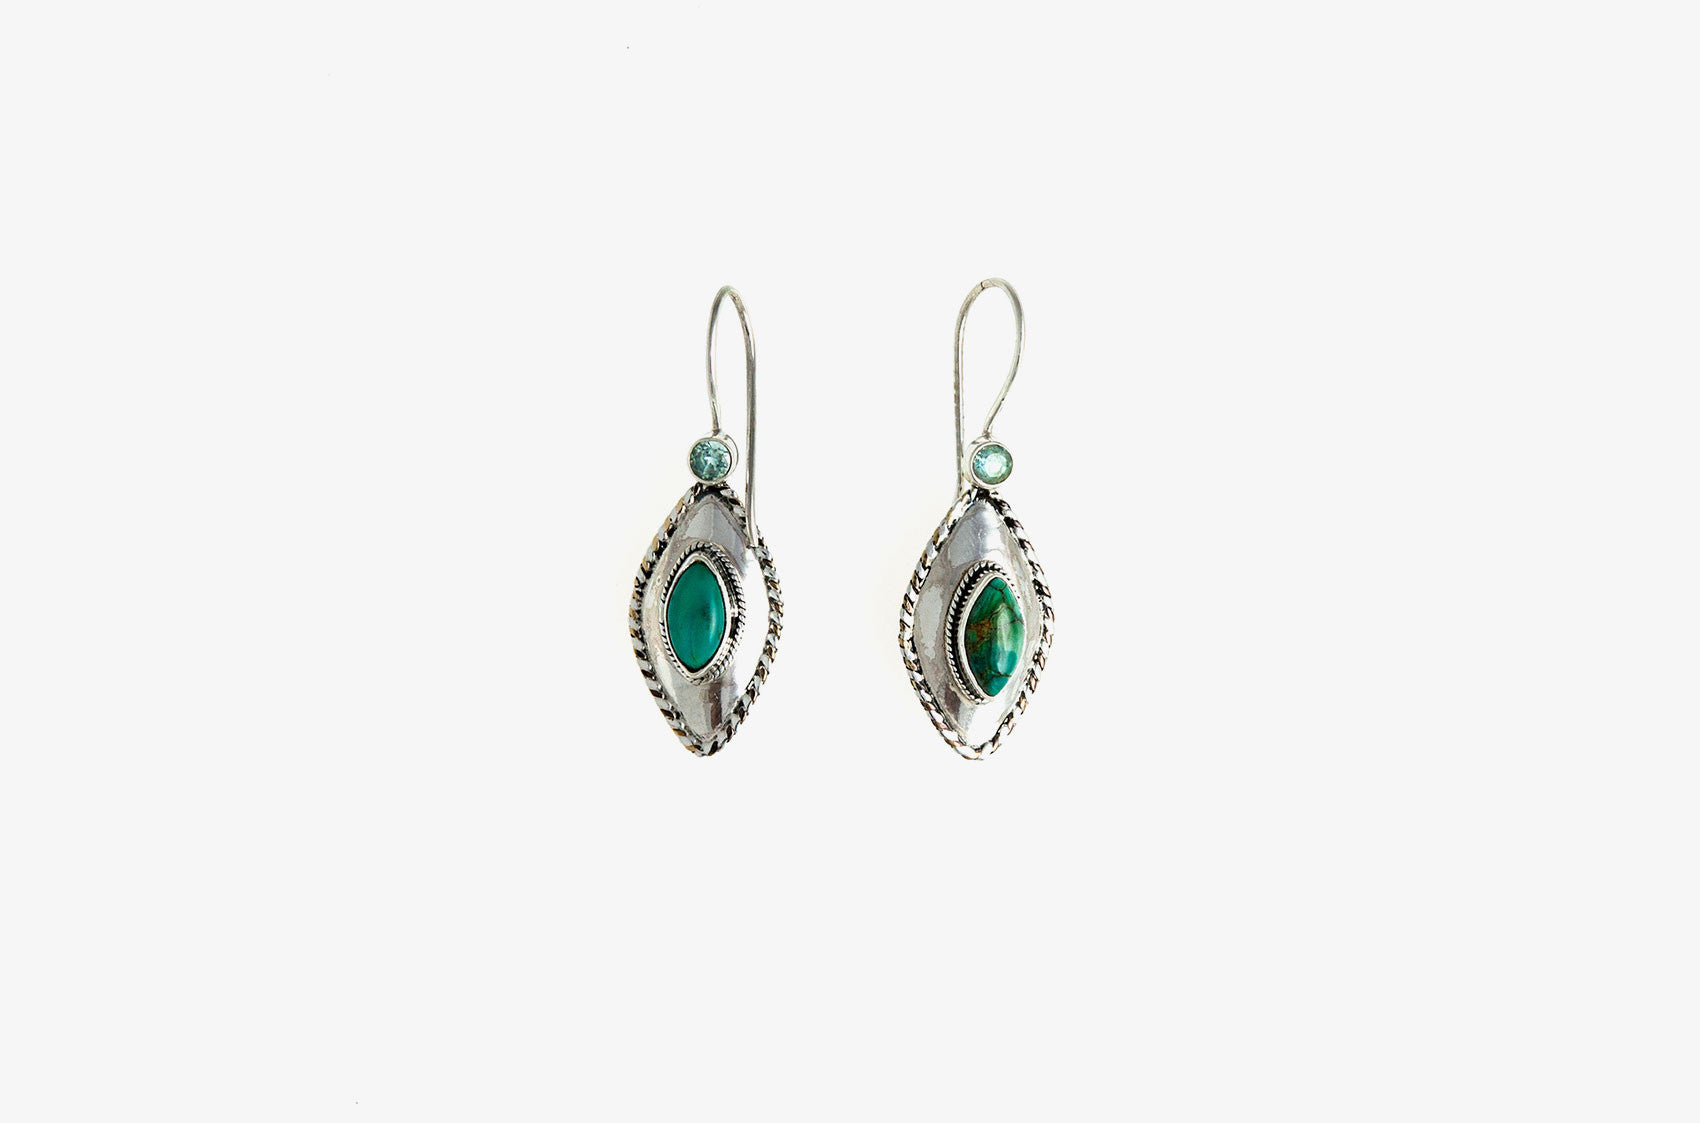 Silver & Stone. Topaz and turquoise earrings